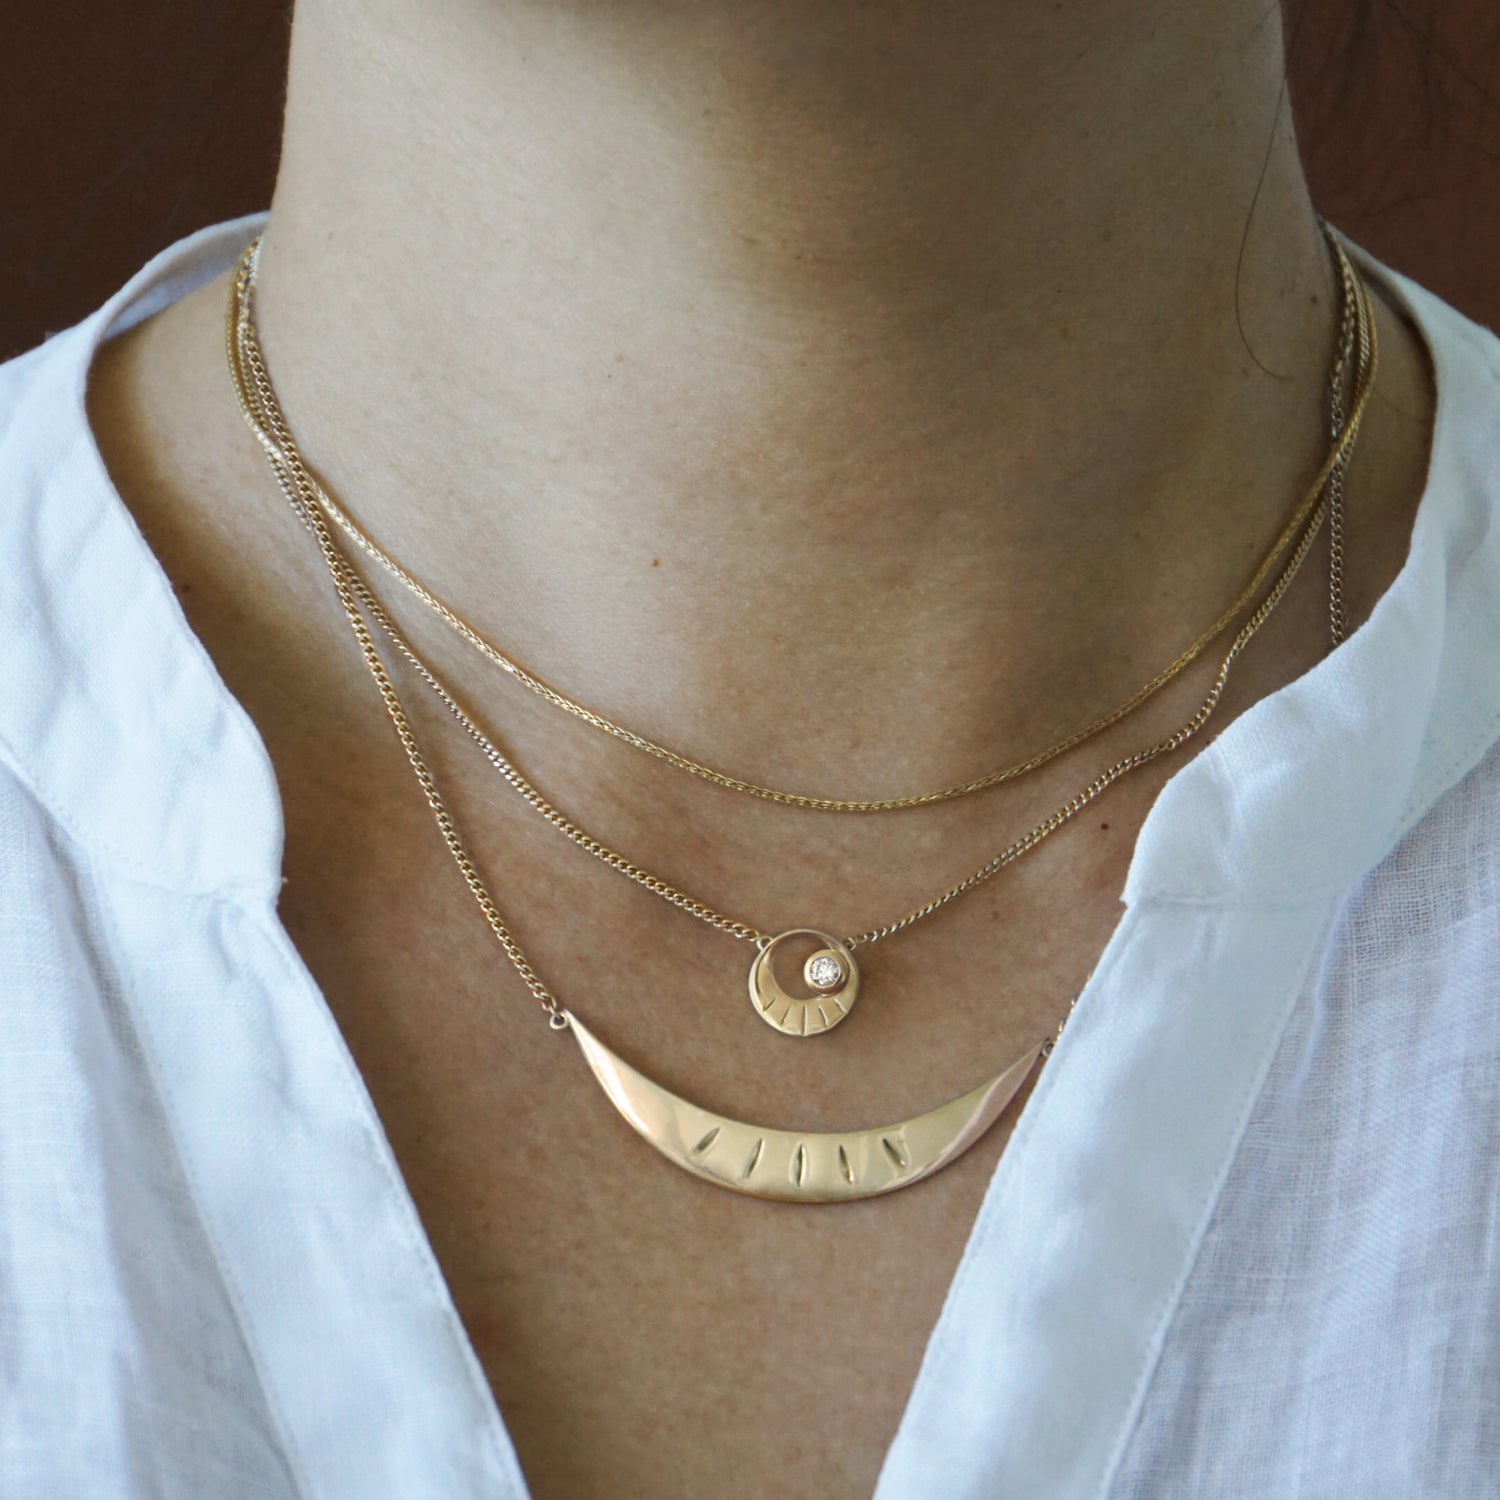 Solid gold yellow necklaces layered - AïANA